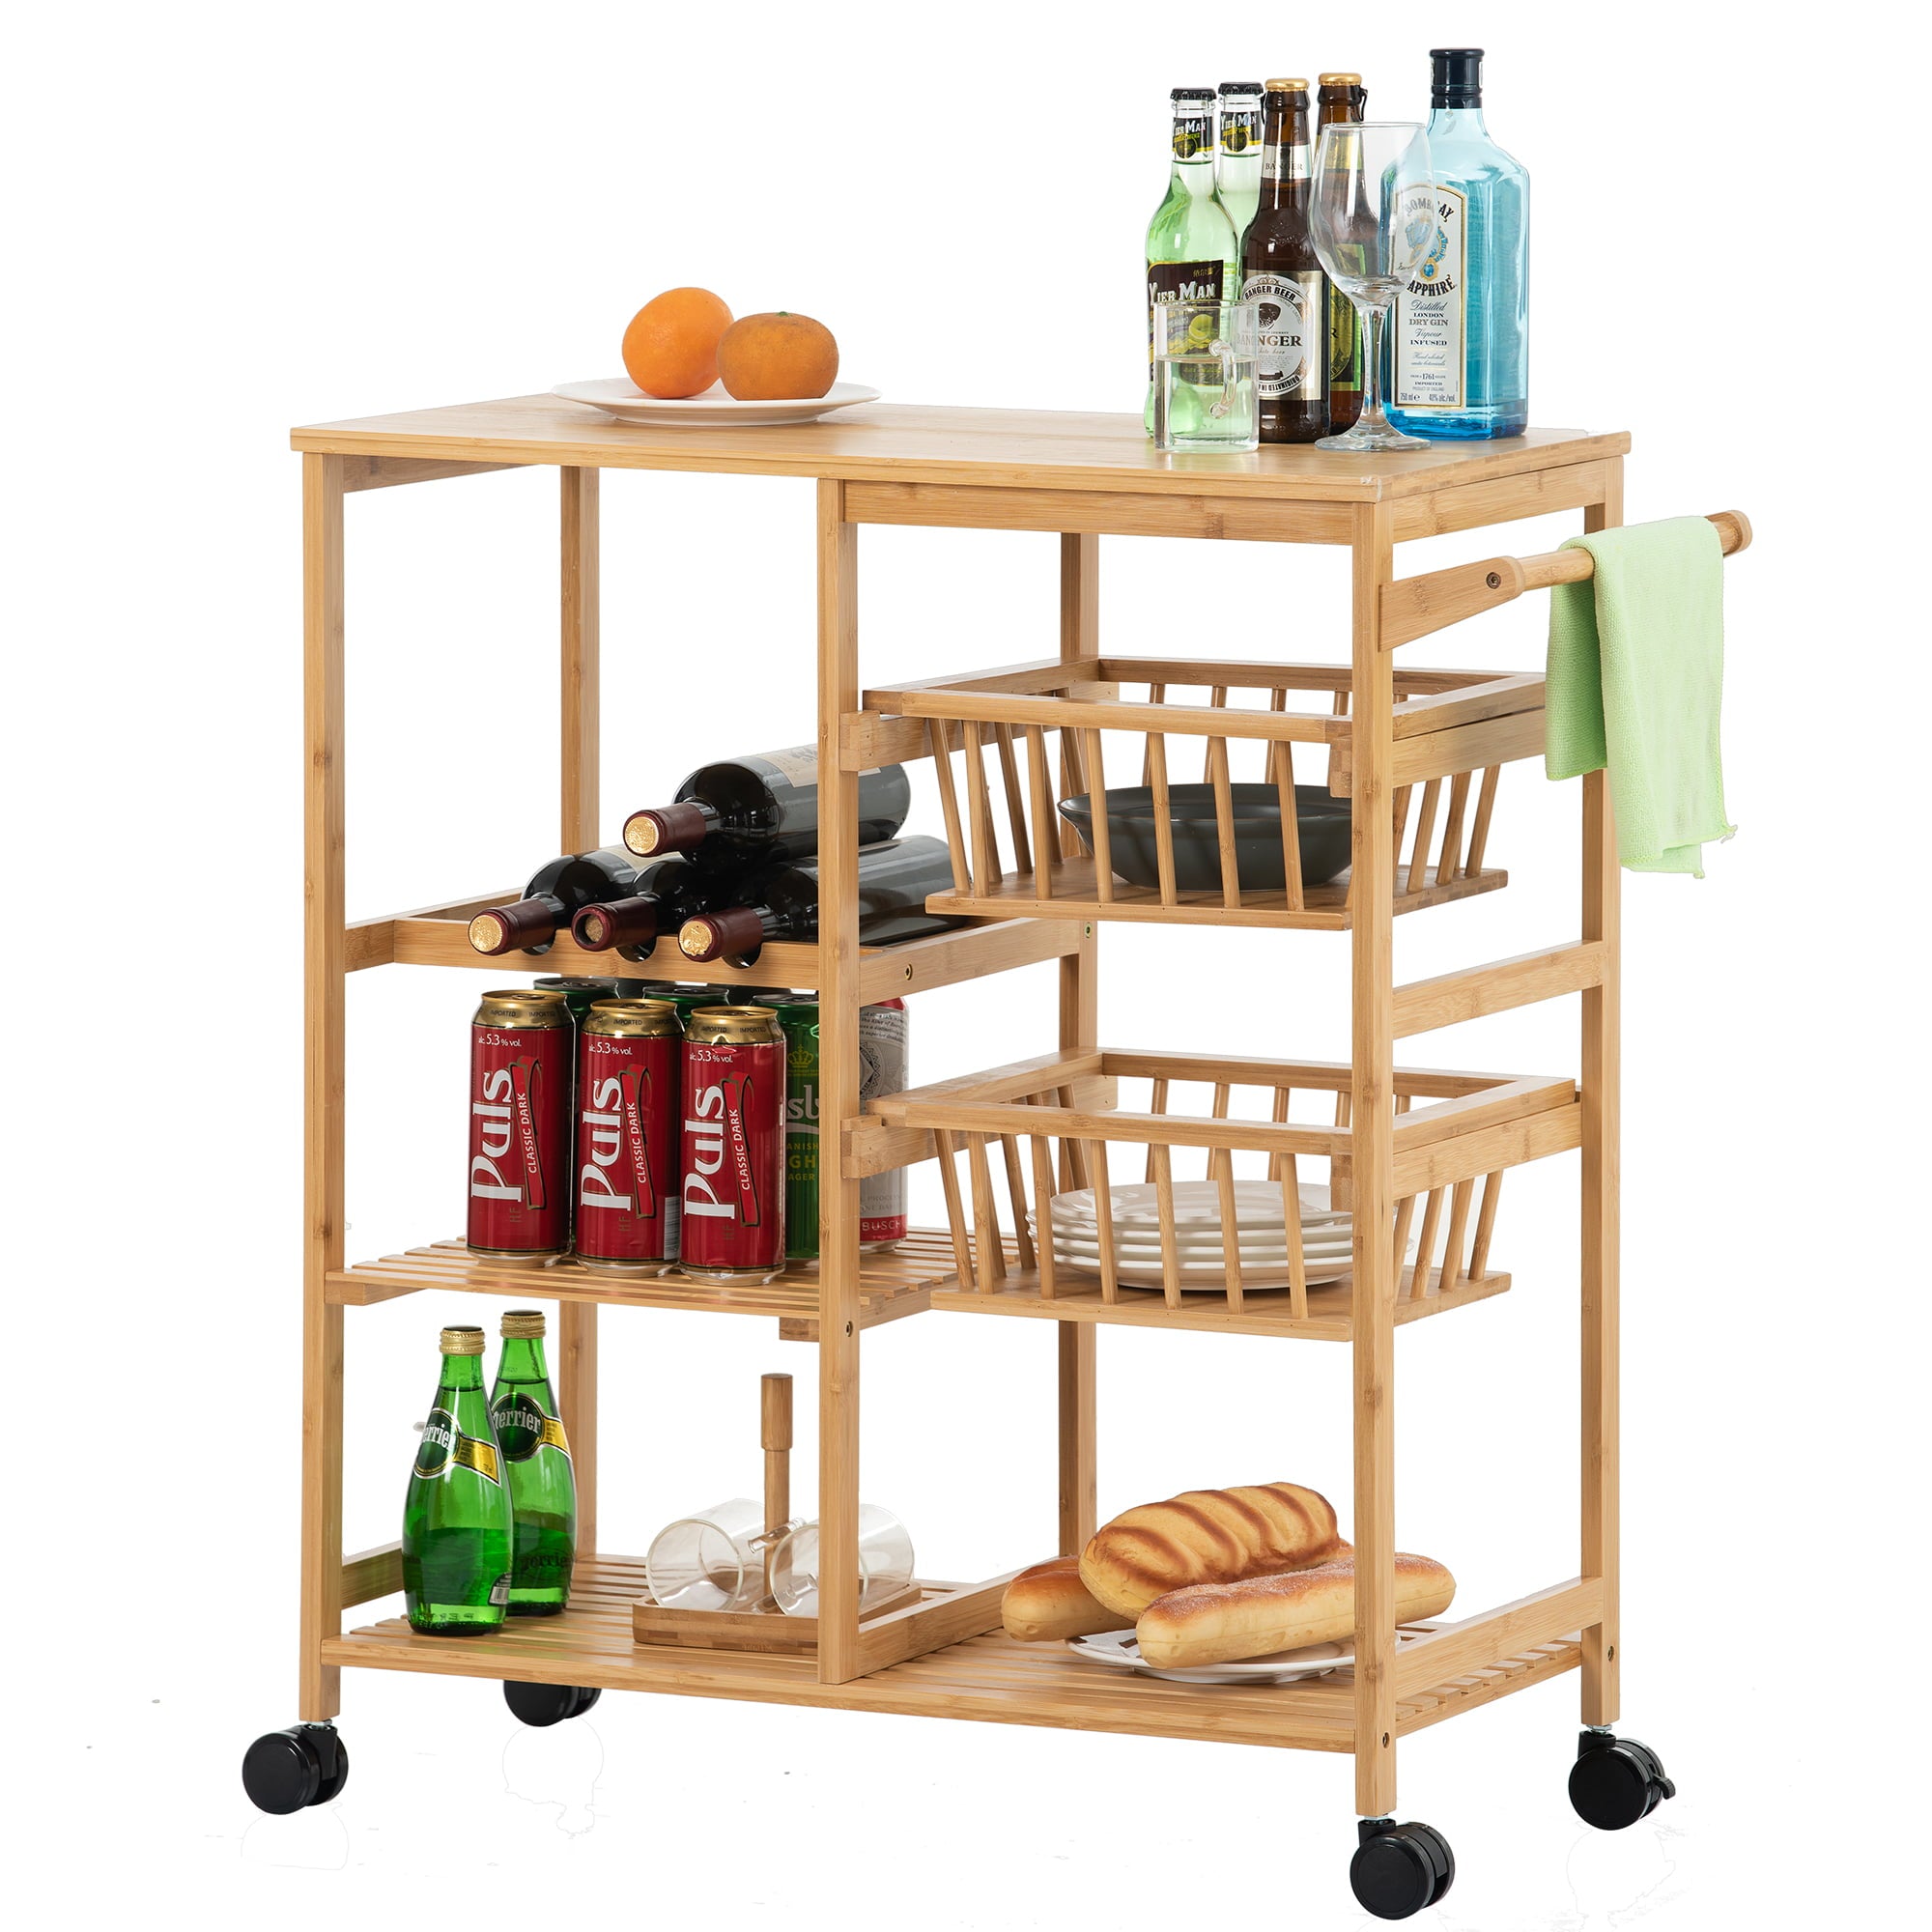 Rolling Kitchen Cart with Storage， BTMWAY Wood Kitchen Bakers Rack 3-Tier Utility Cart on Wheels， Counter Top Table Kitchen Microwave Cart with 2 Baskets， 3 Shelf， Walnut